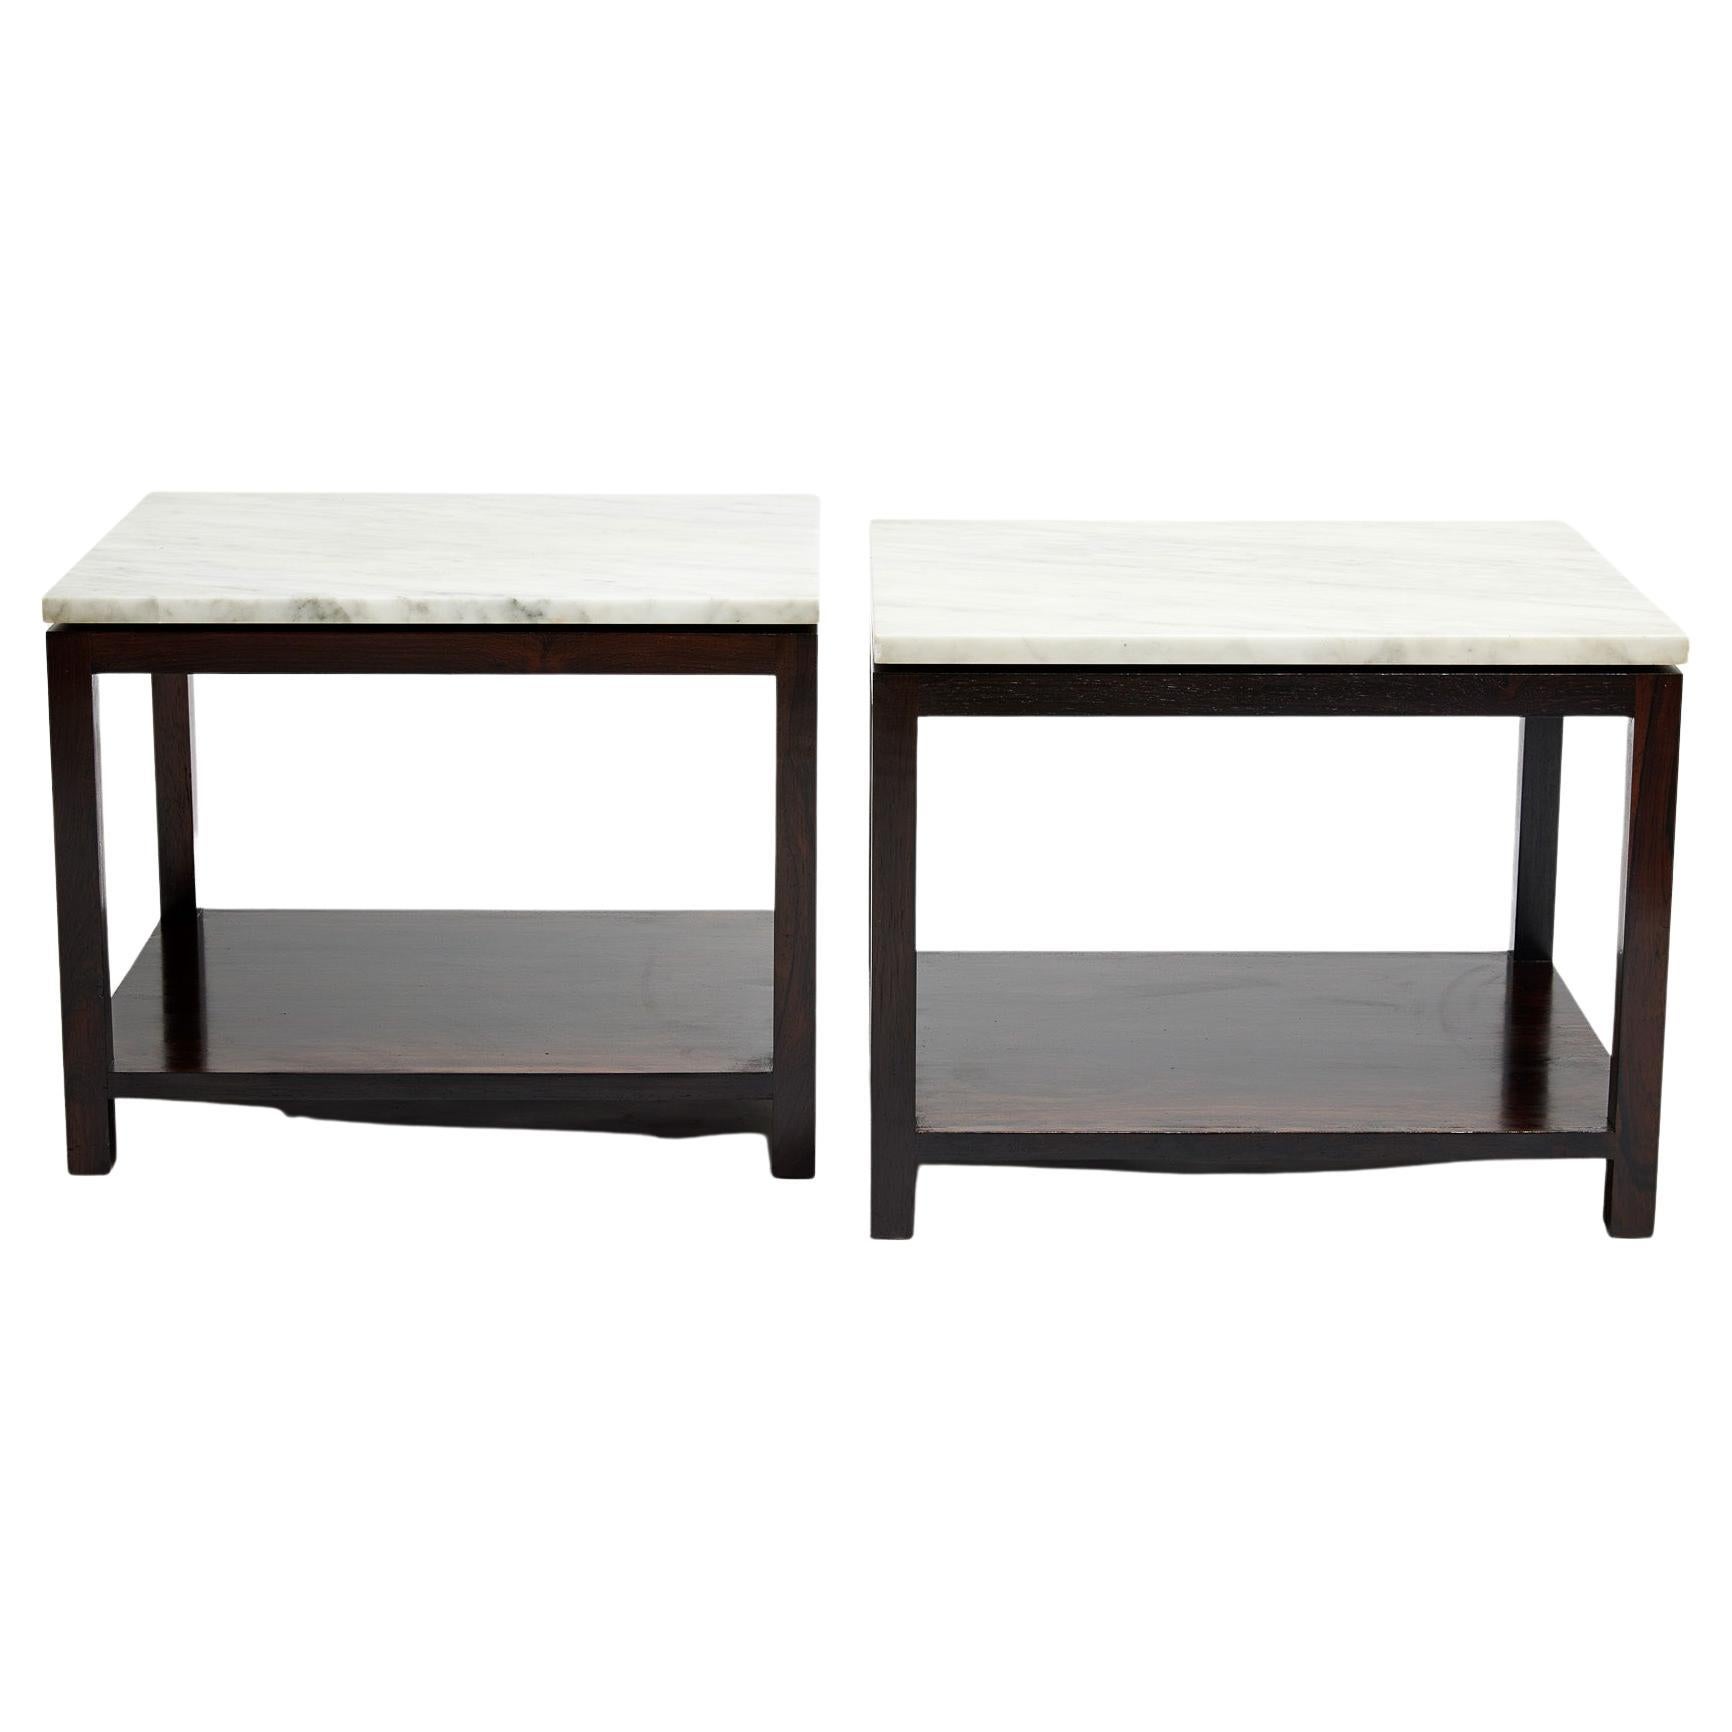 Available today, this Mid-Century Modern Side Table Pair made in Hardwood & Marble, in the sixties is stunning!

This very elegant pair of side tables are made of Brazilian Rosewood, as known as Jacaranda Marble. The shape is rectangular with two